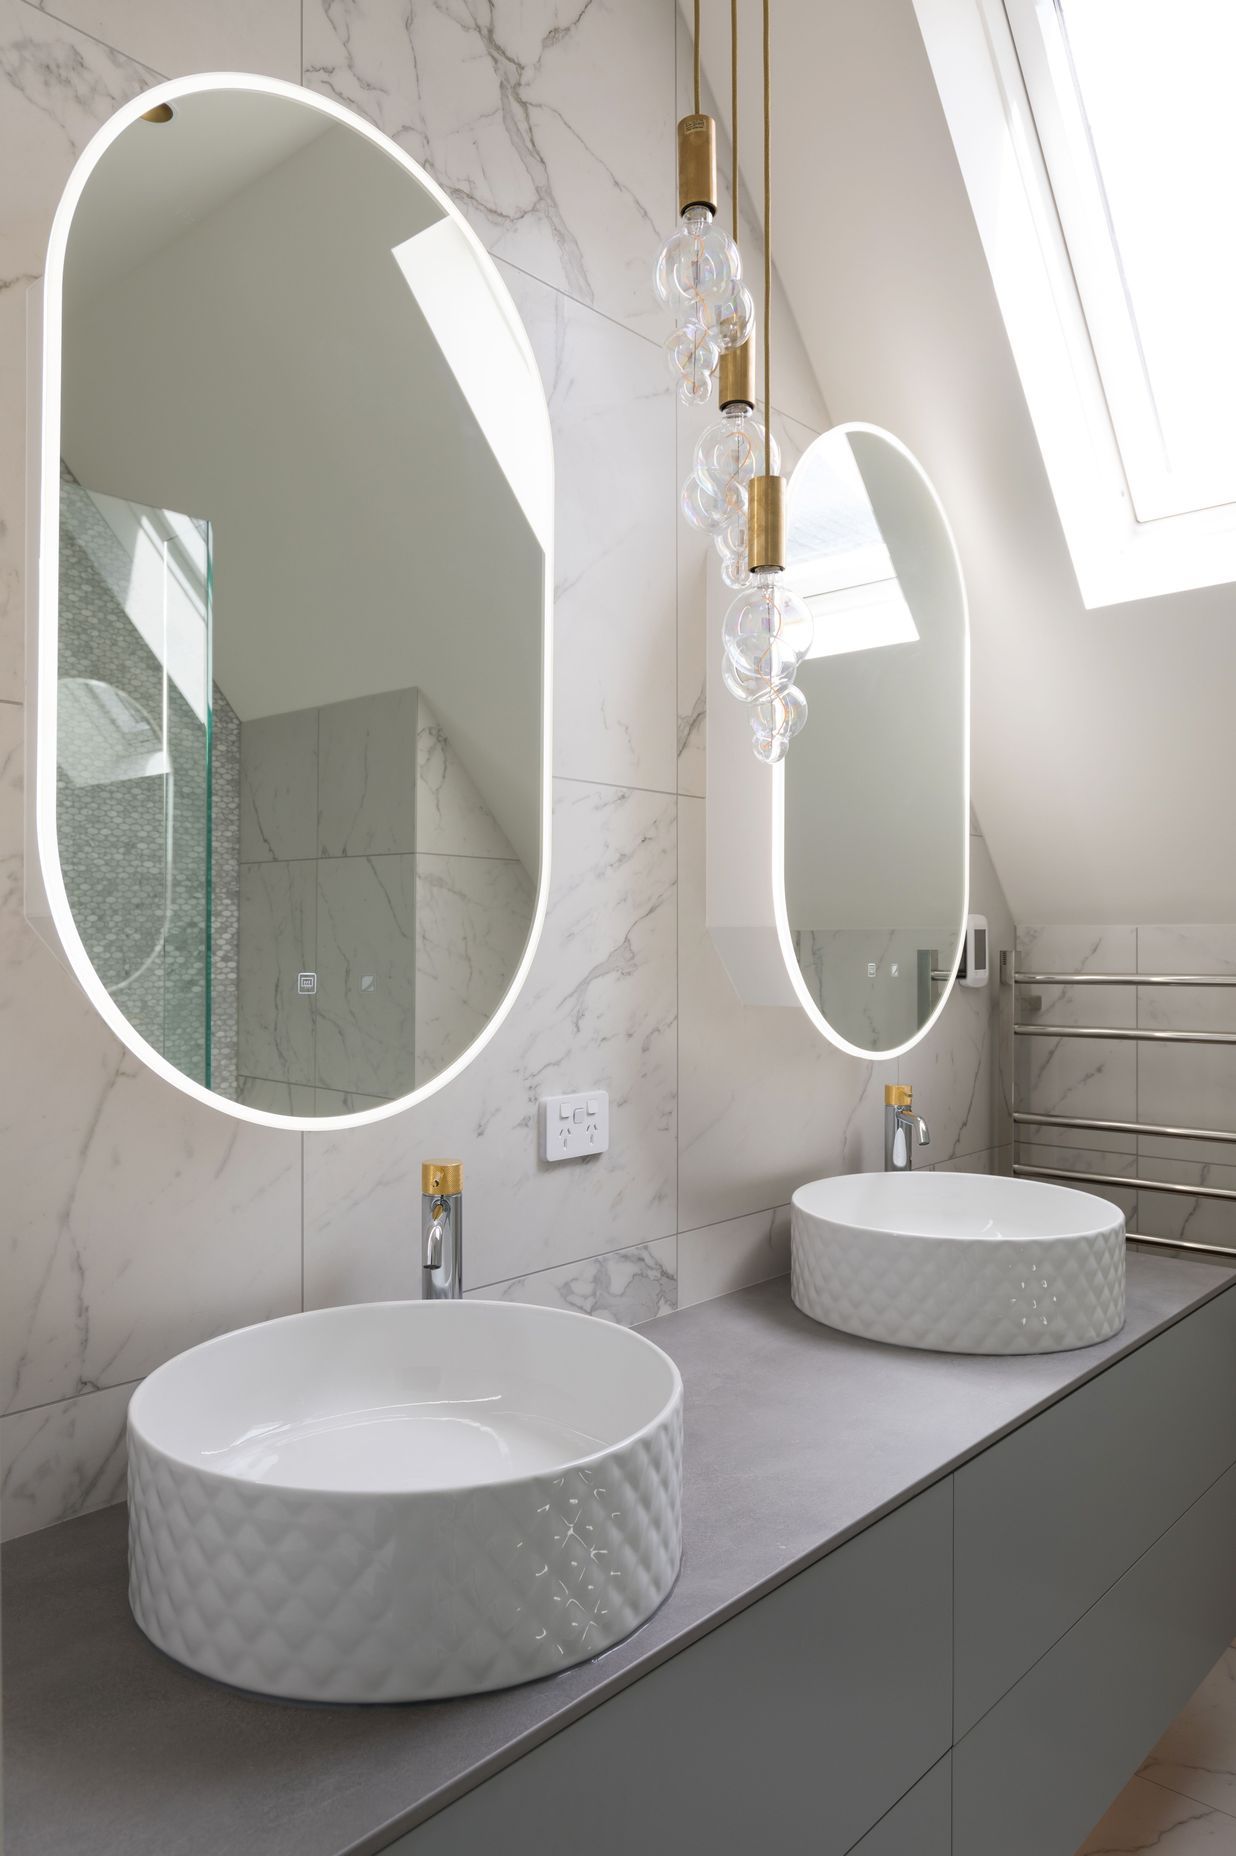 Ensuite Bathroom - double mirrored cabinets